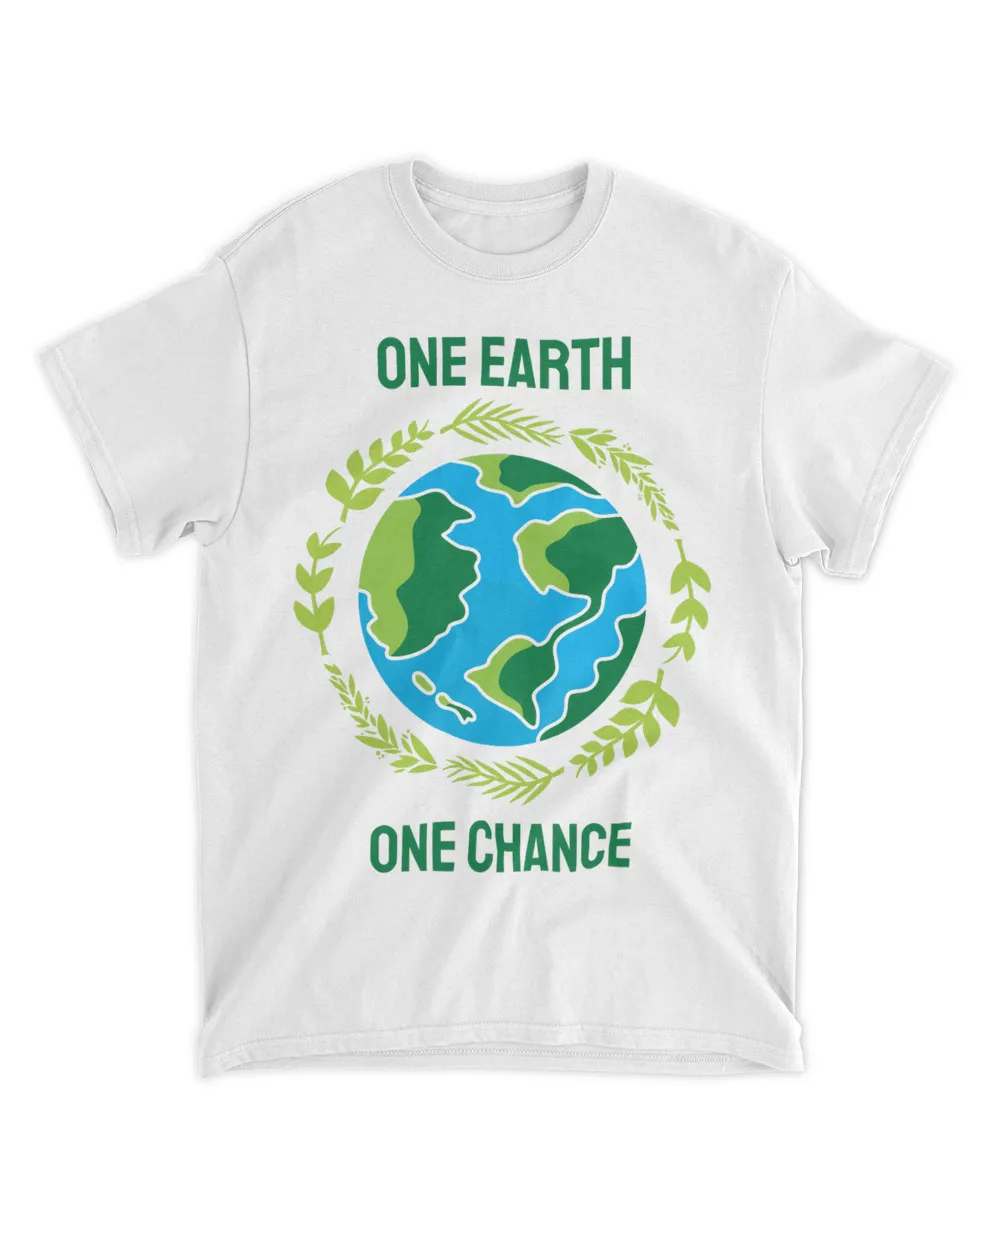 One Earth One Chance (Earth Day Slogan T-Shirt)